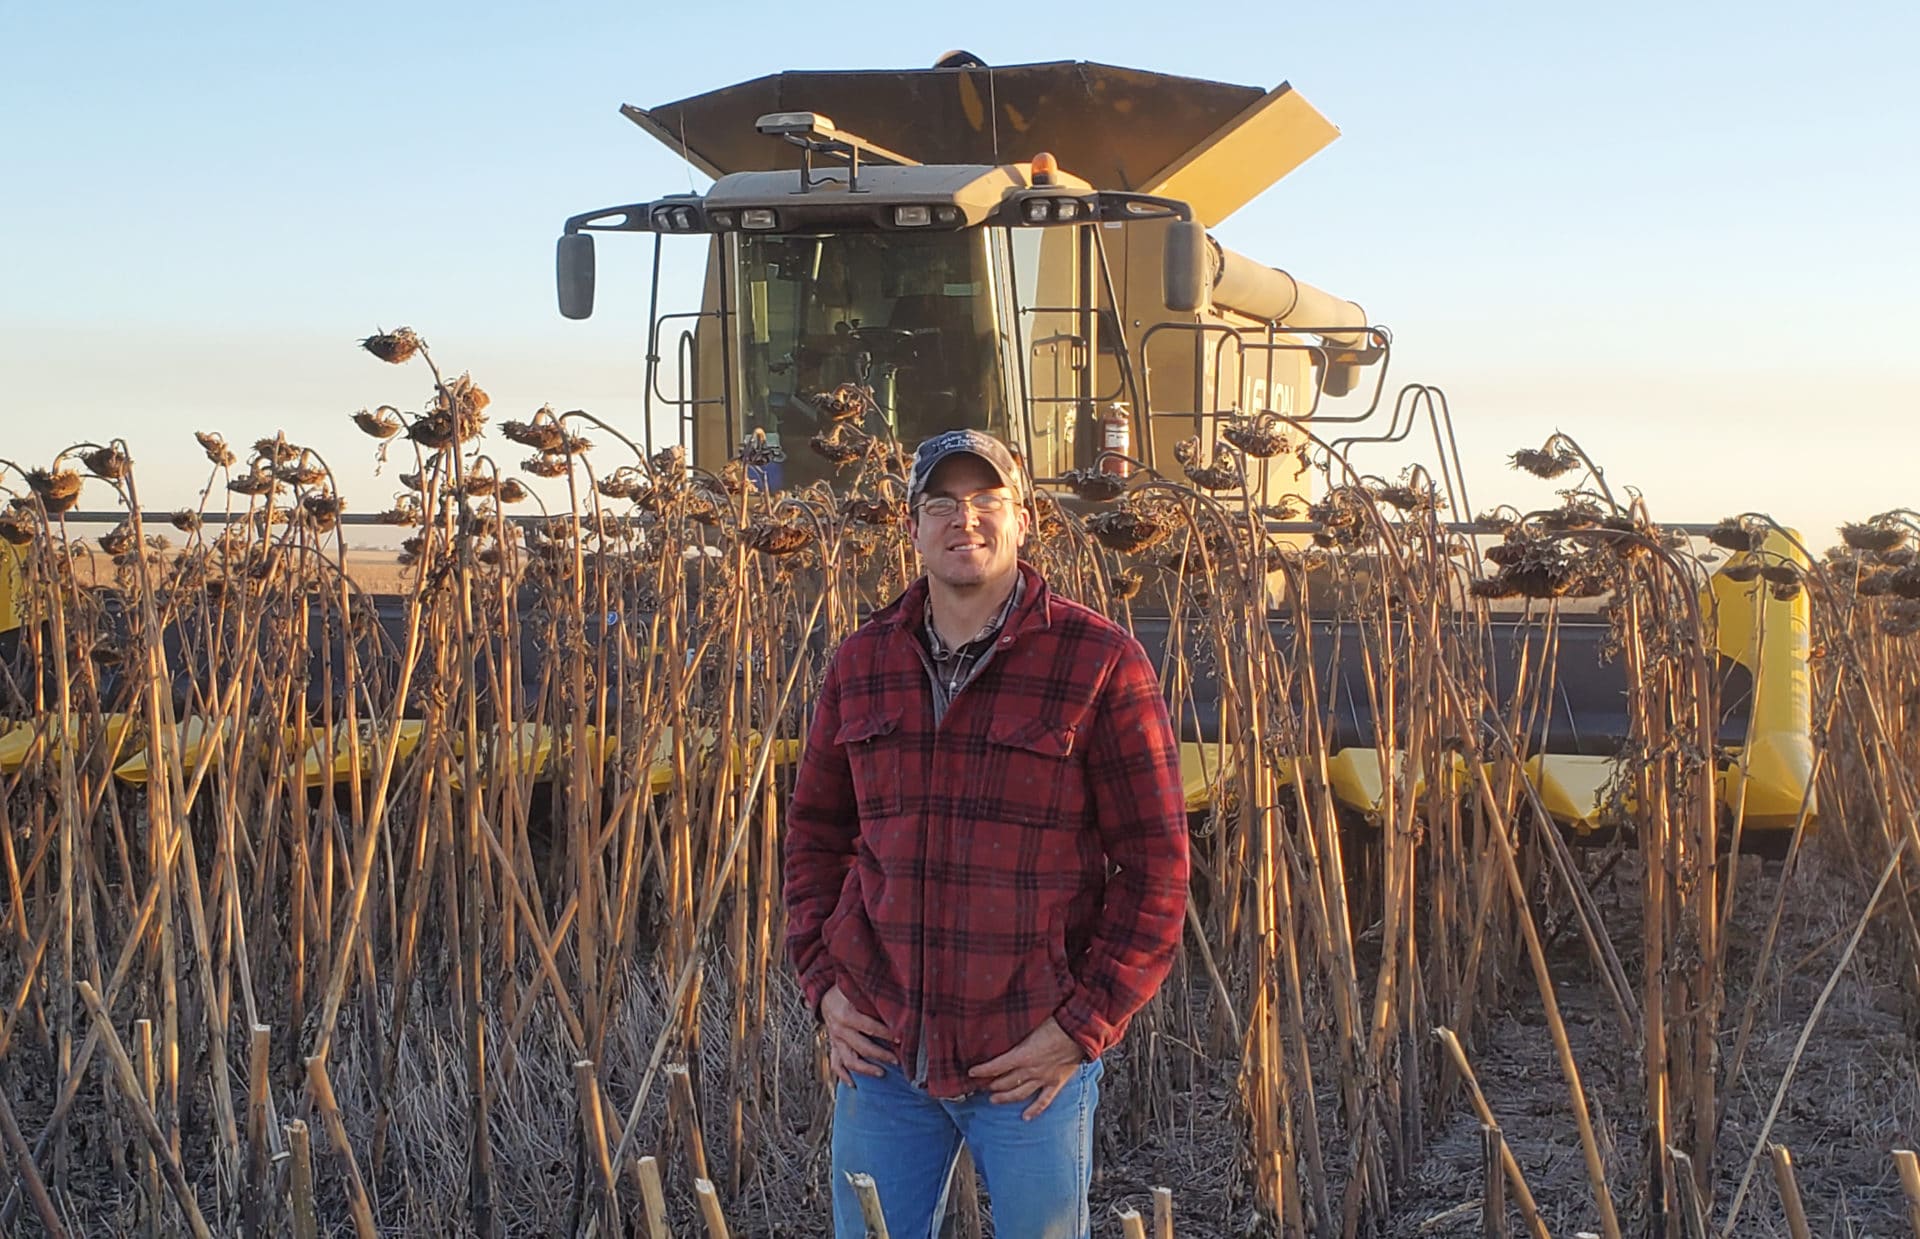 As he builds soil health through the use of regenerative agricultural principles, Brandon Bock continues to see improvements in his North Dakota farming operation. “Whether it’s through the diversity of cover crops, cash crops, and even insects. Keeping life on our fields is the key,” he says.